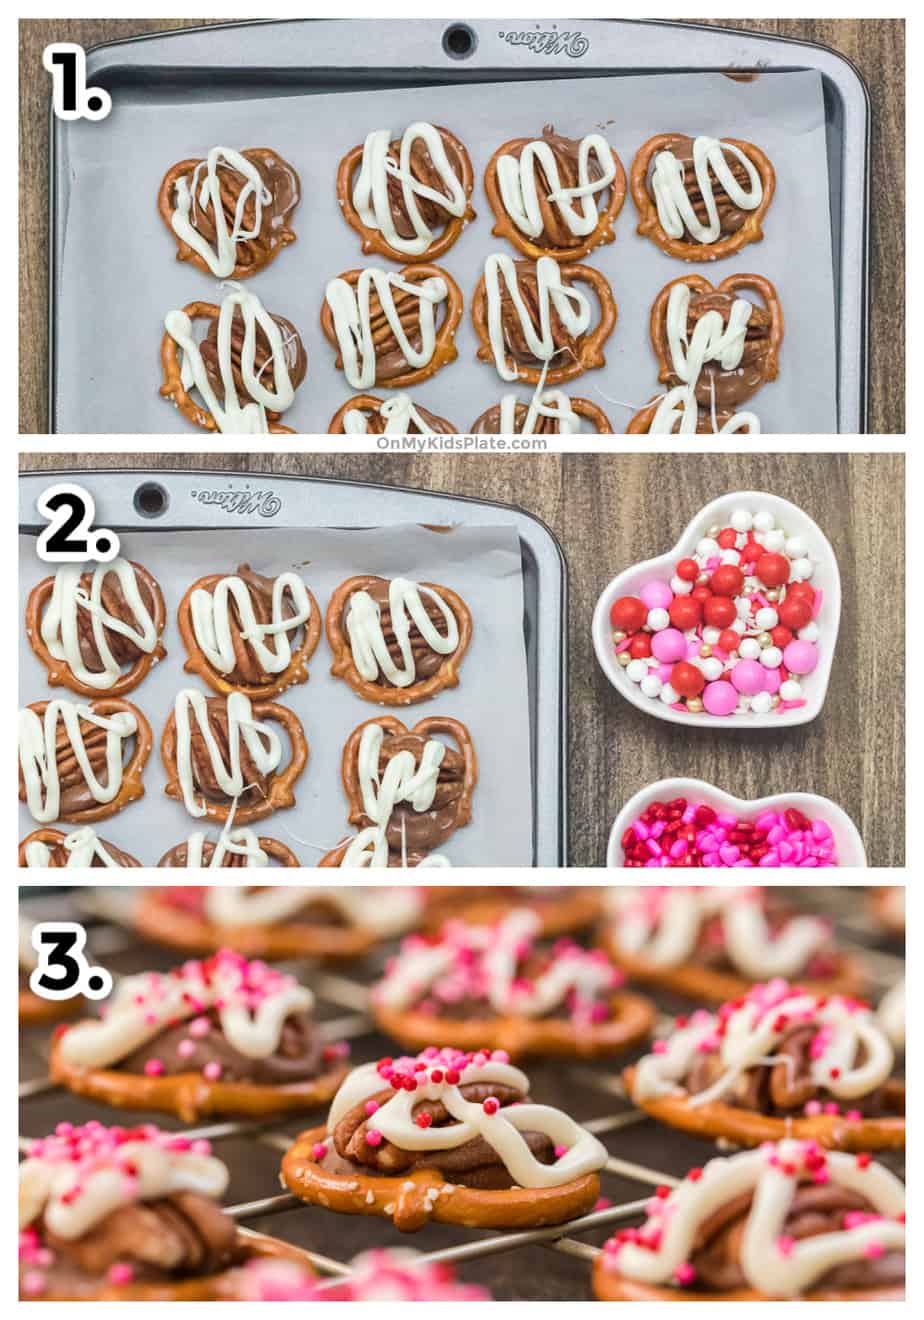 Step by step photos showing homemade pretzel turtles being drizzled with white chocolate, sprinkles and cooling.